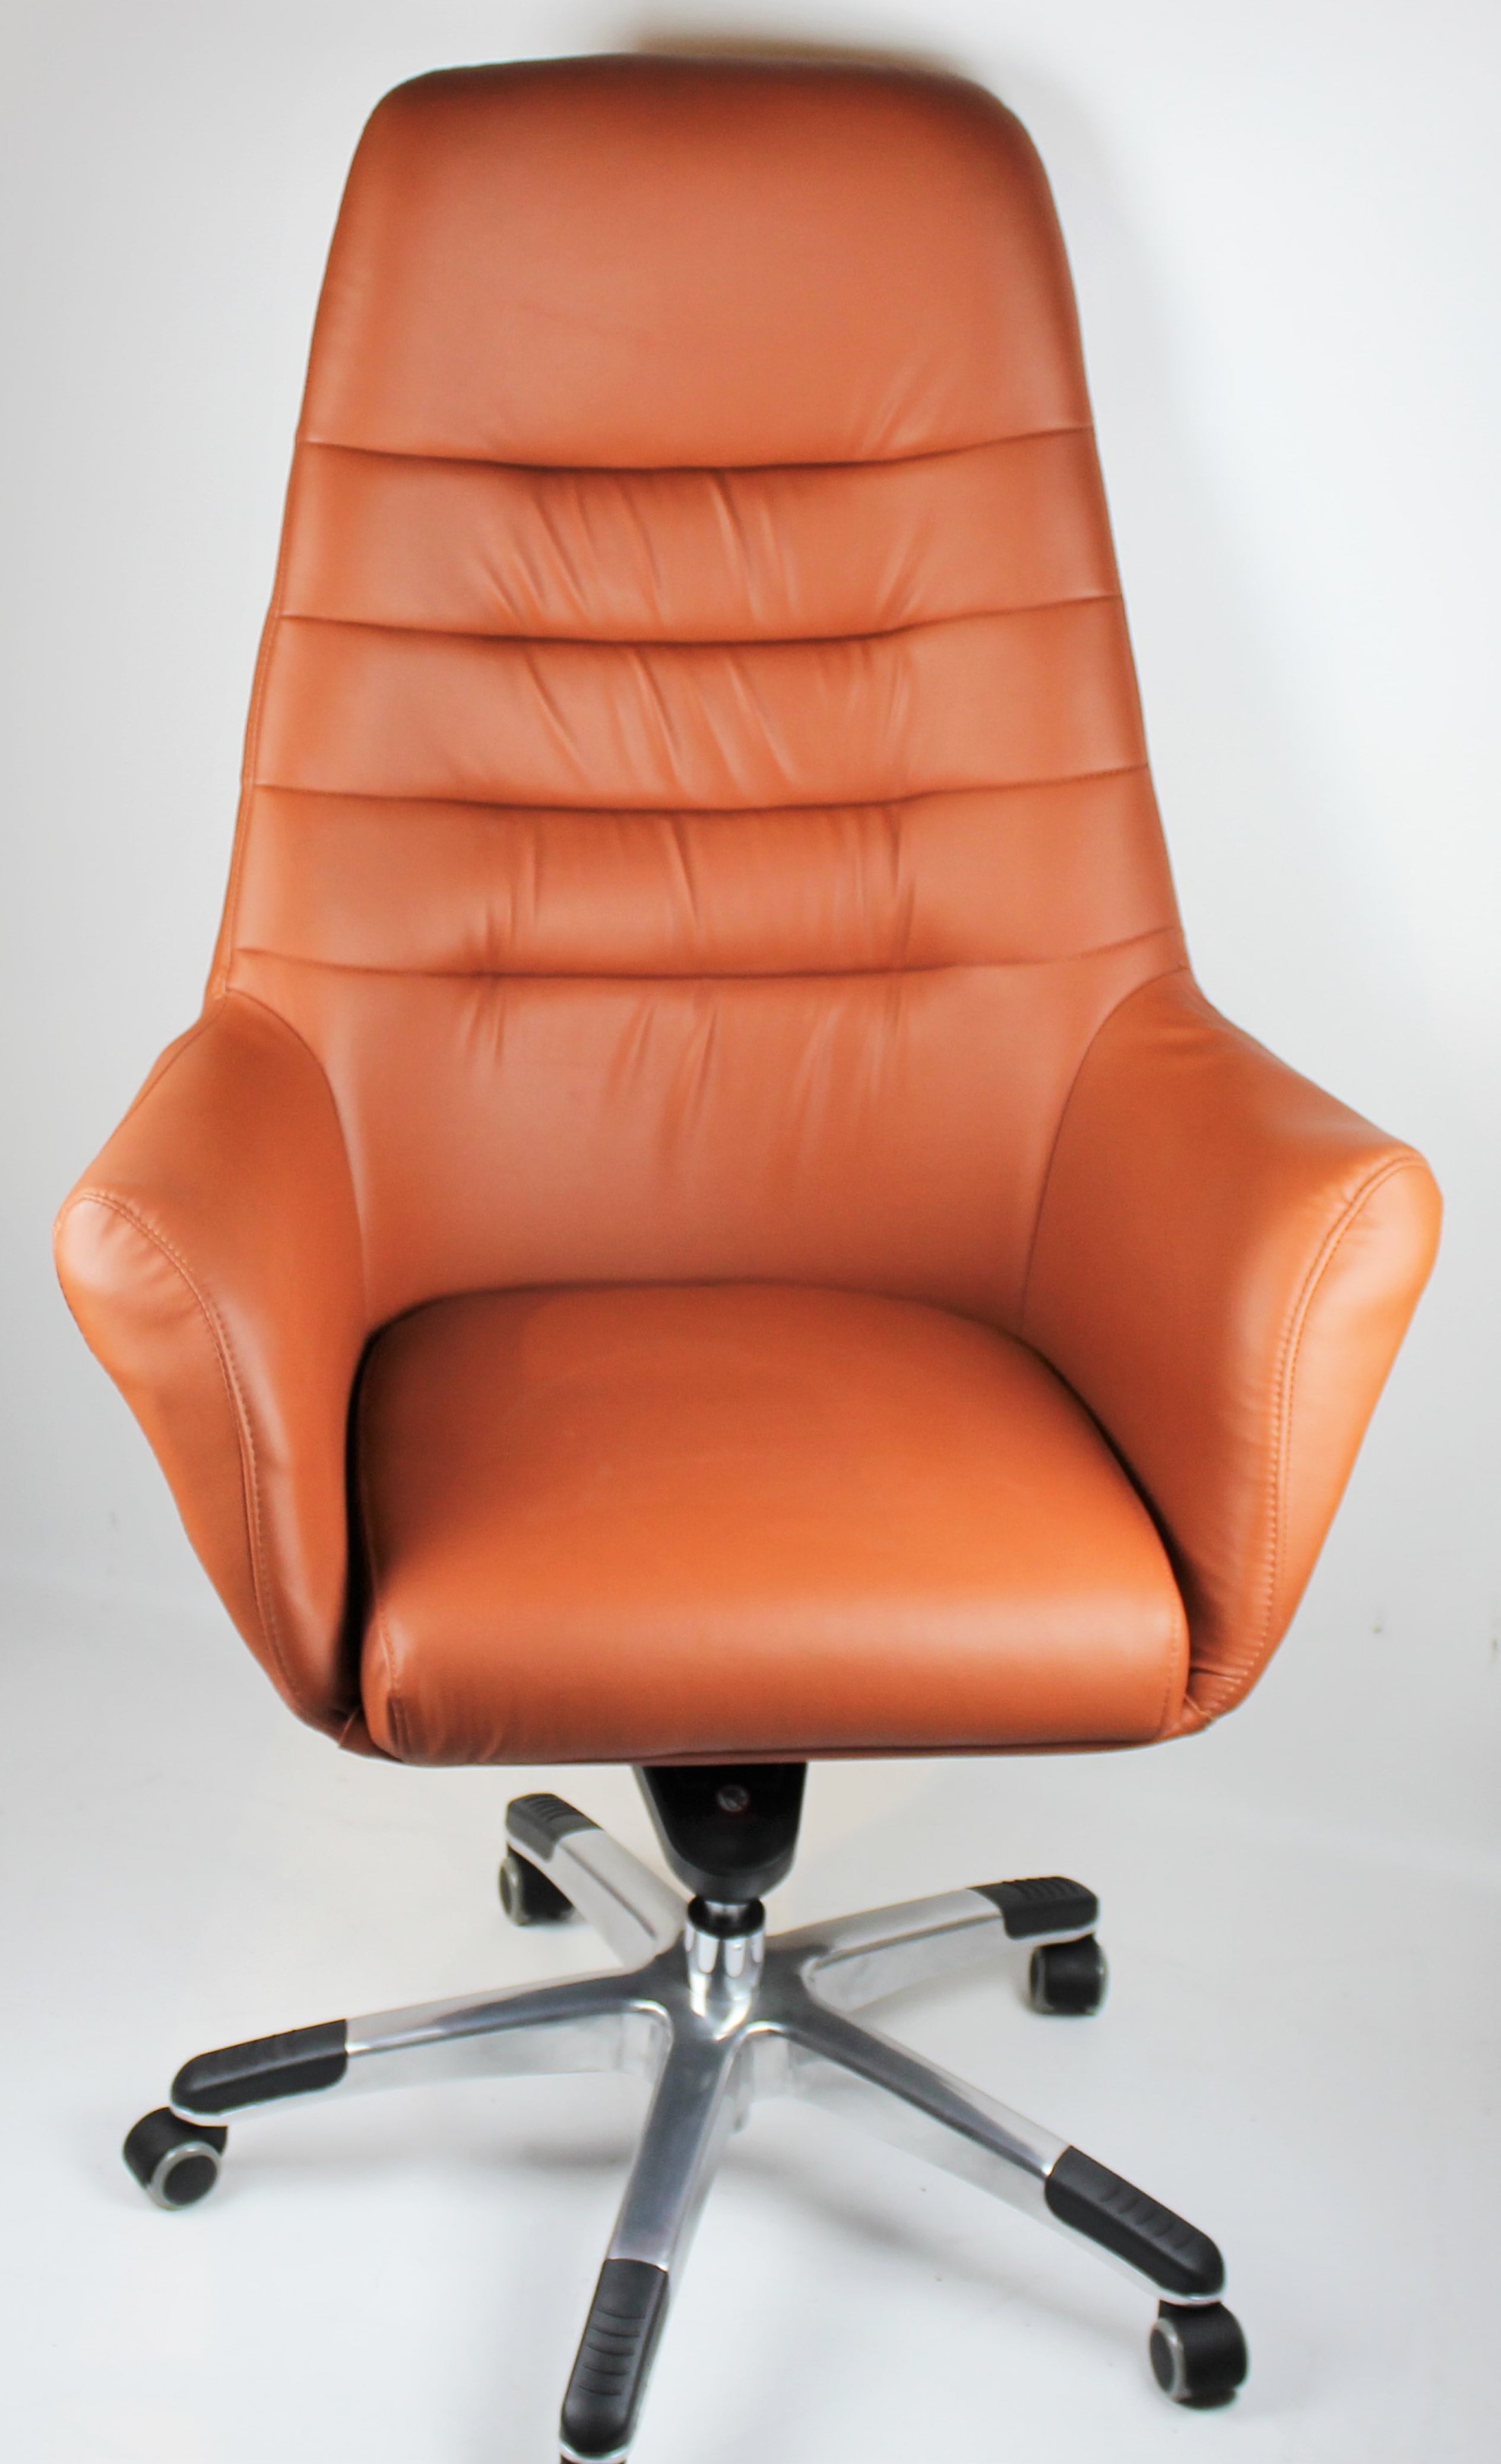 Office Chair In Tan With Swivel GRA-CHA-506A UK